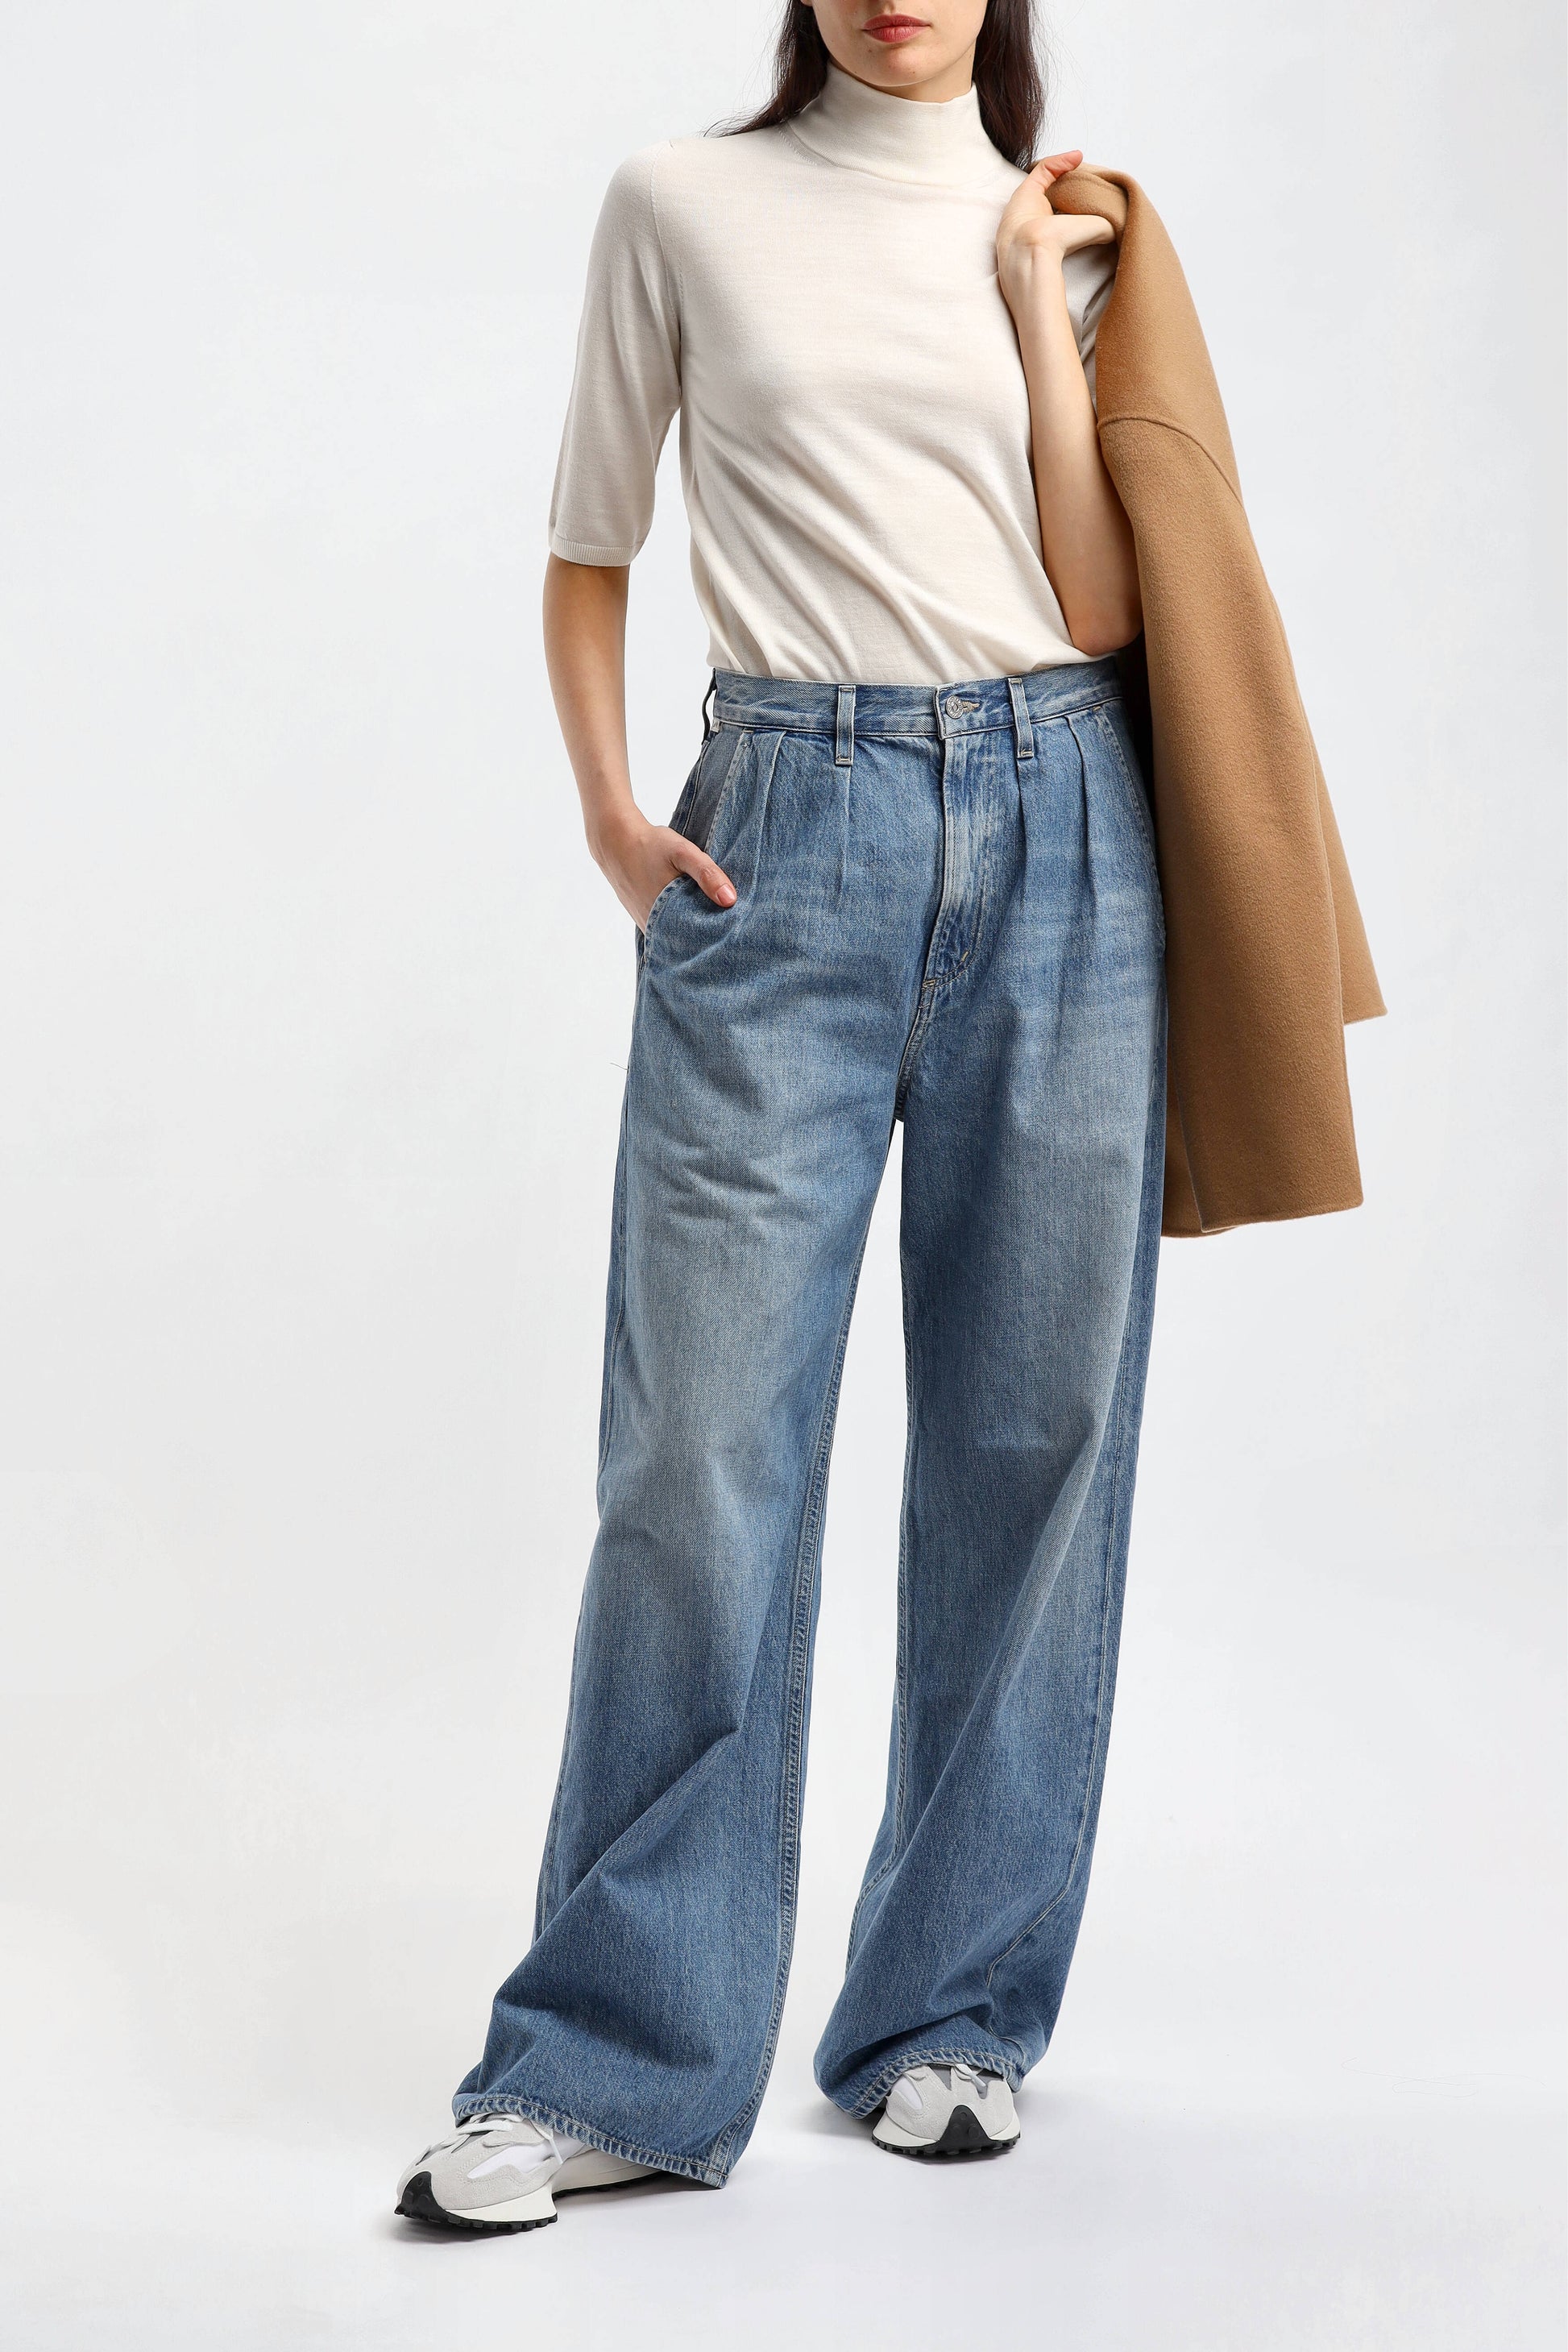 Jeans Maritzy Pleated in MojoCitizens of Humanity - Anita Hass